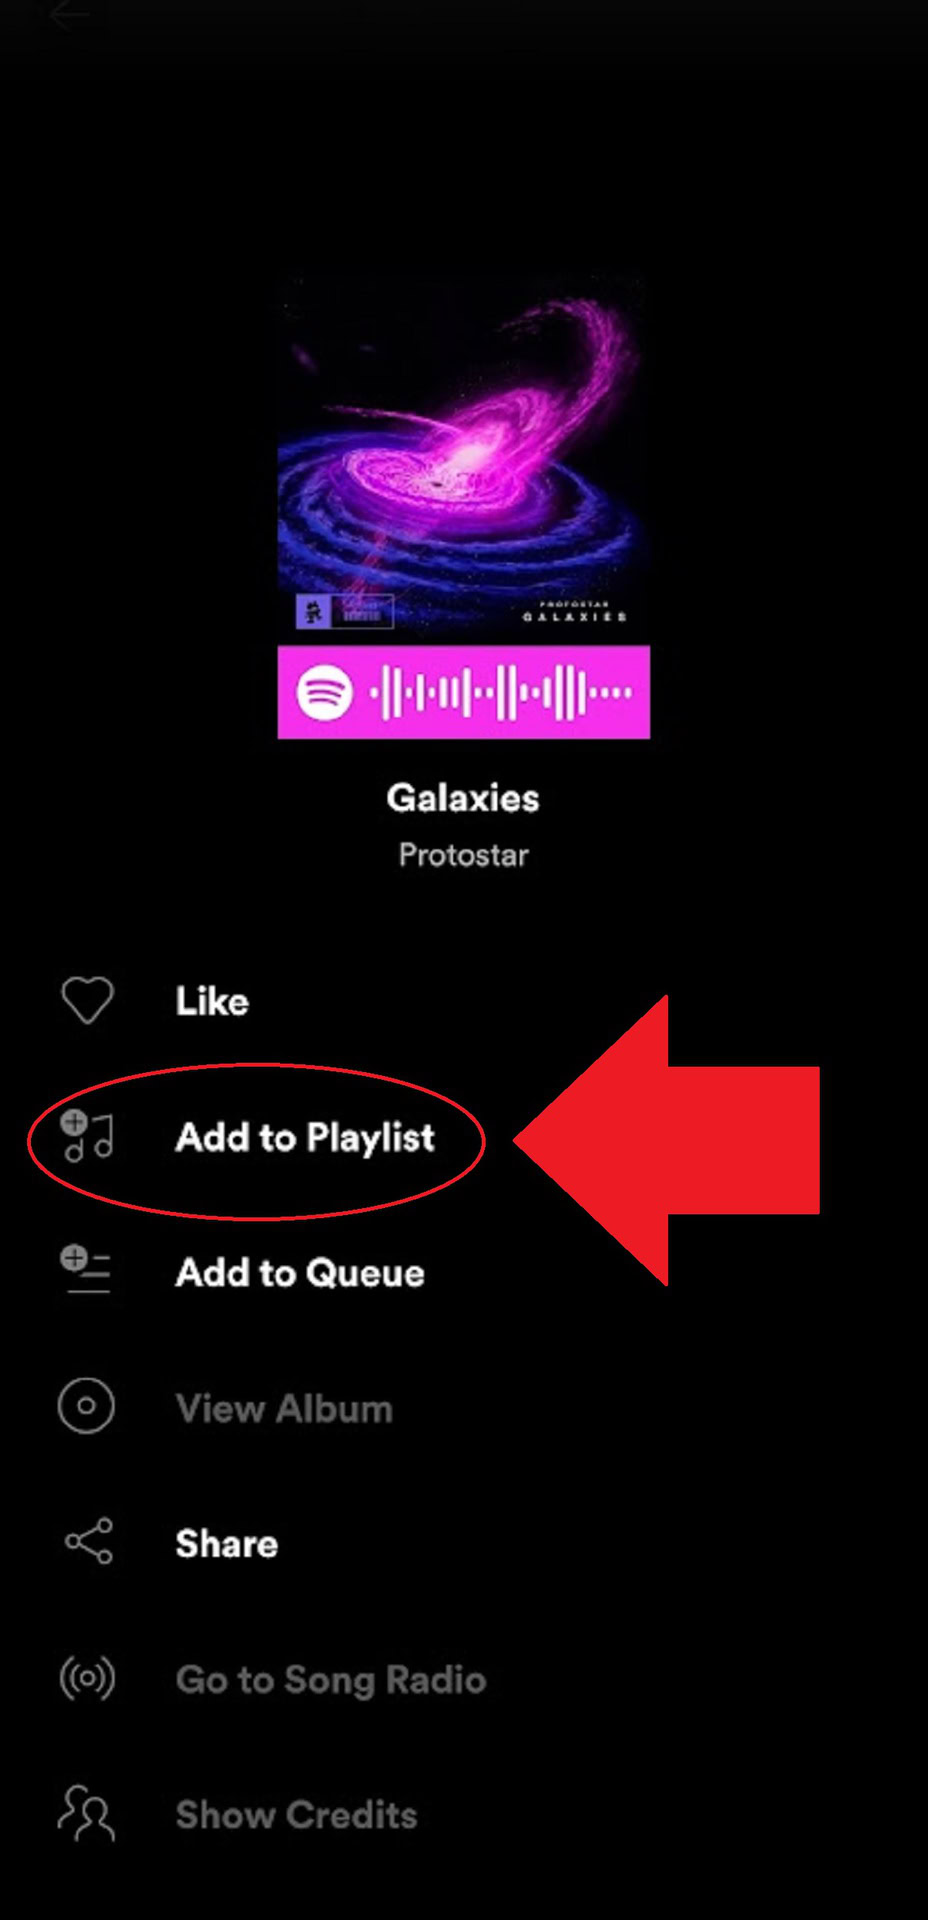 How to add to playlist mobile screenshot spotify